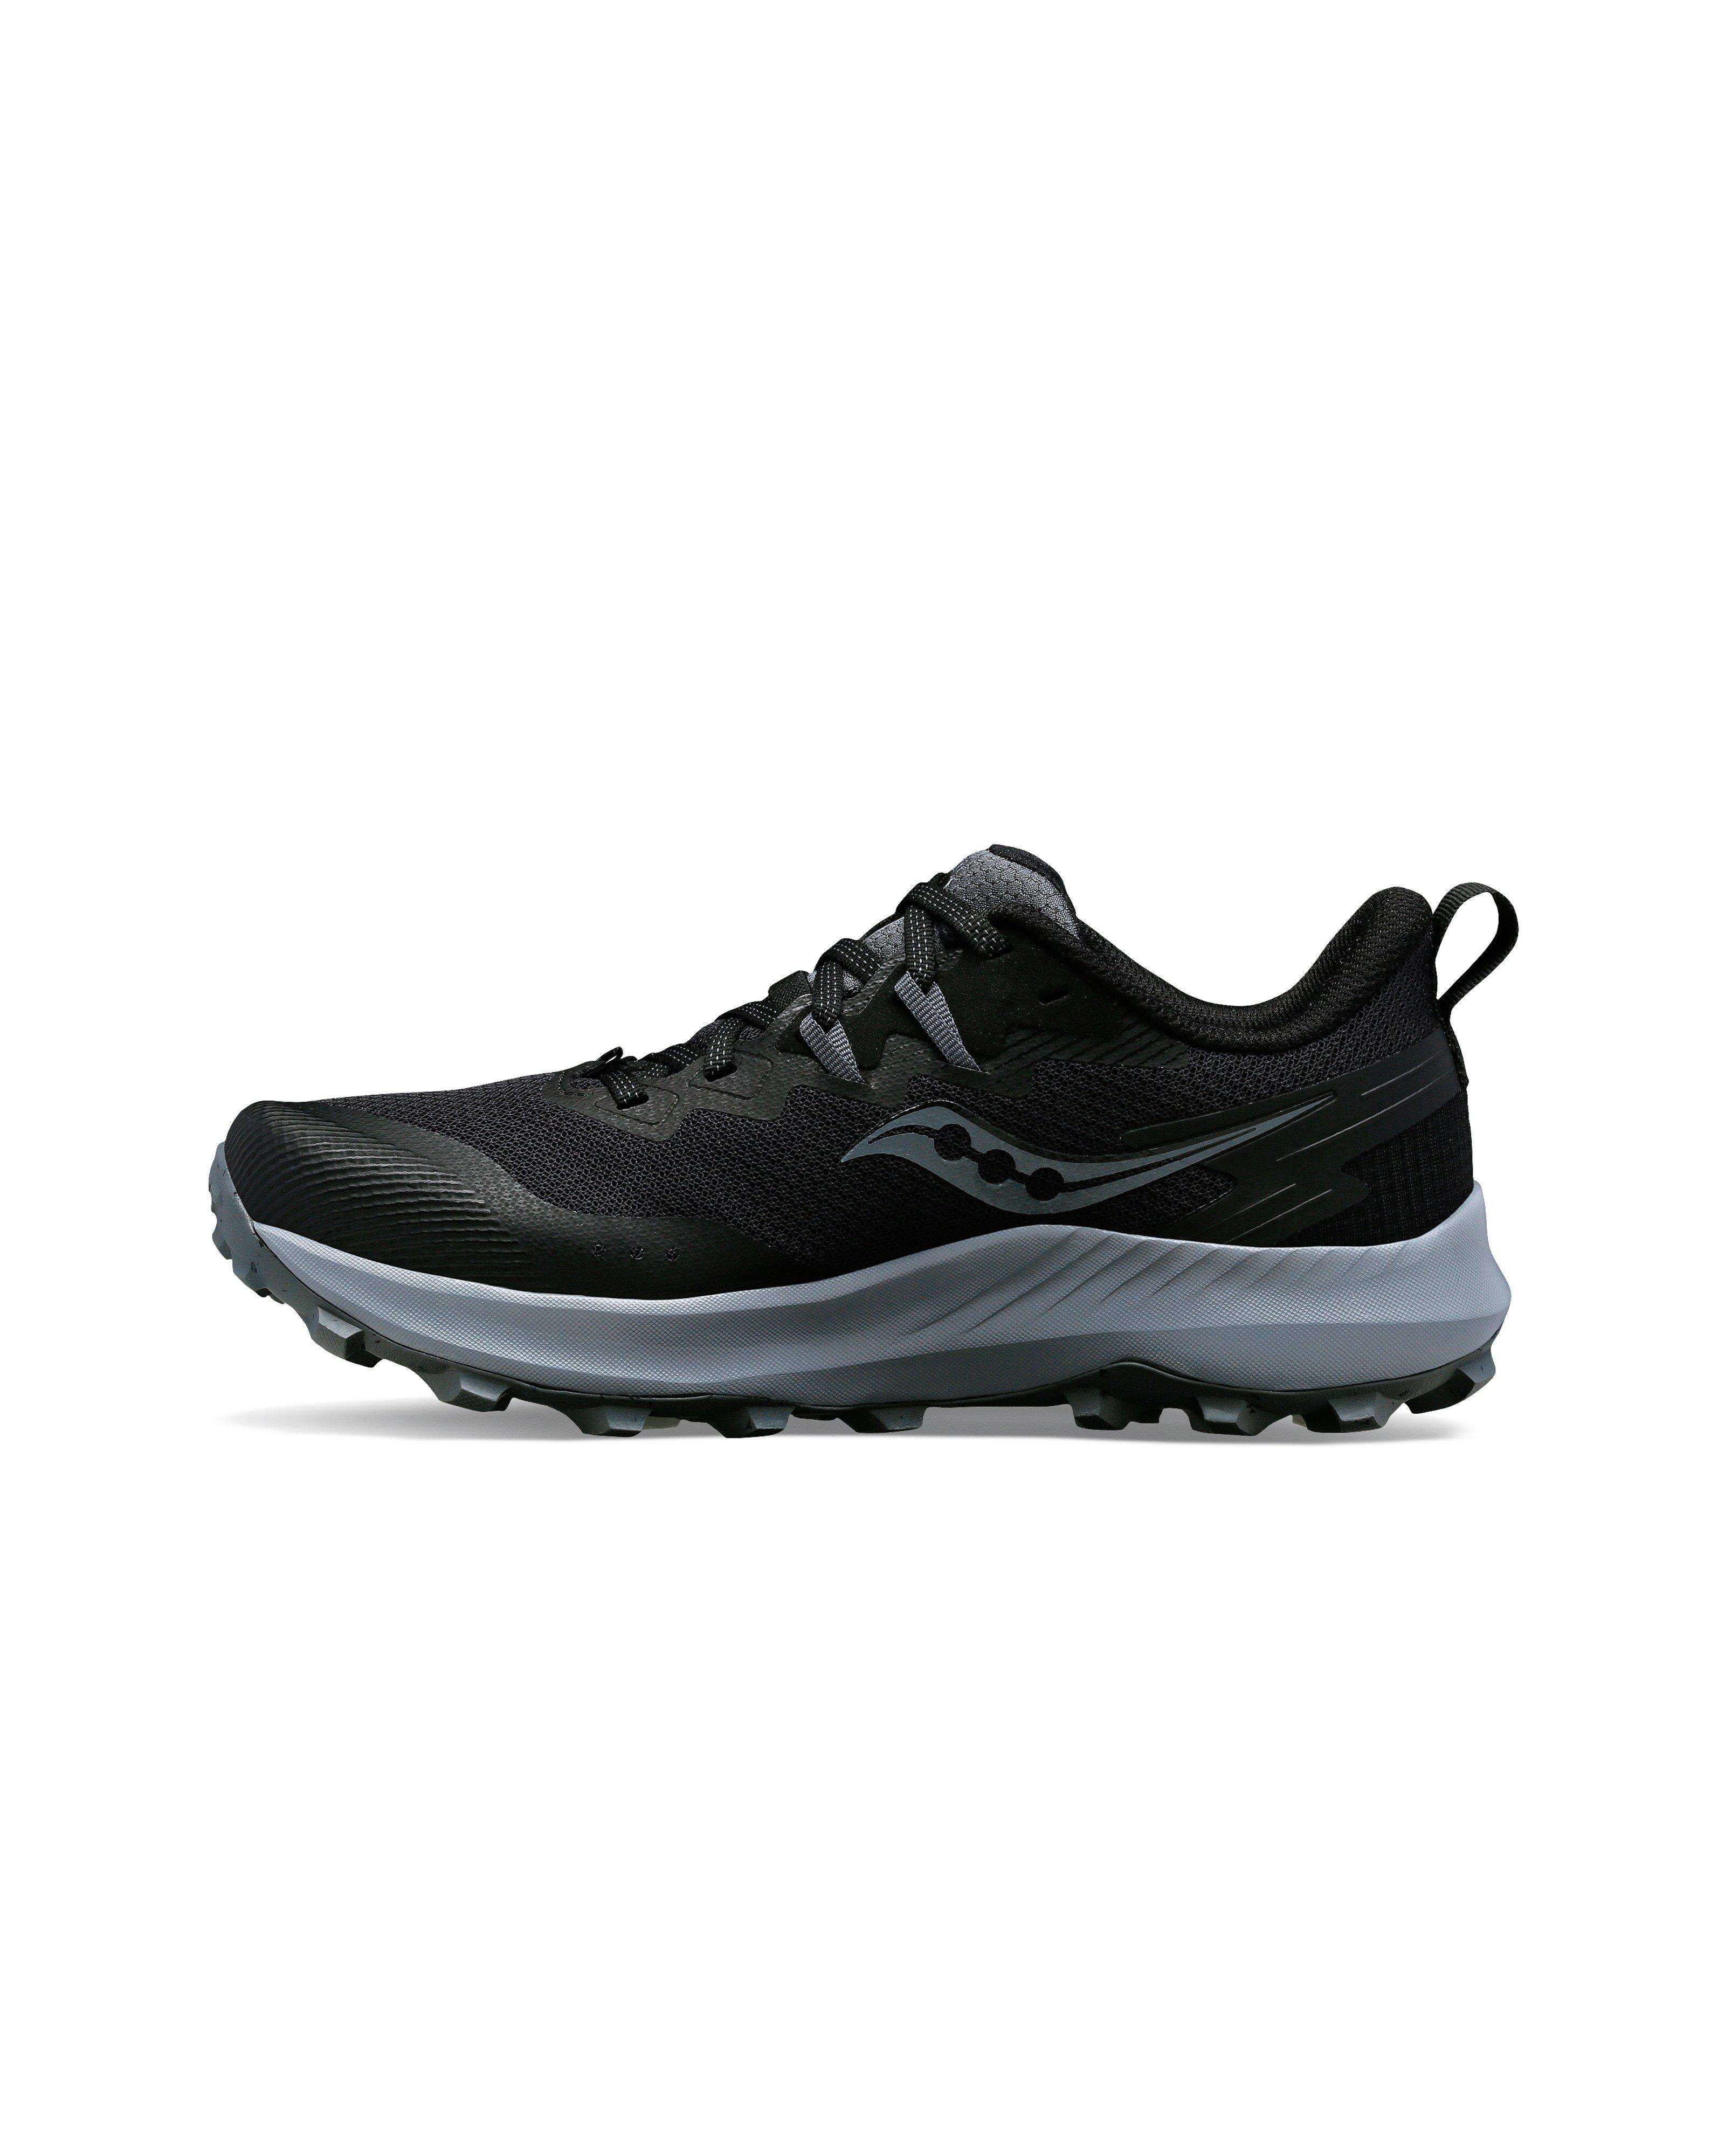 Saucony Men’s Peregrine 14 Trail Running Shoes -  Black